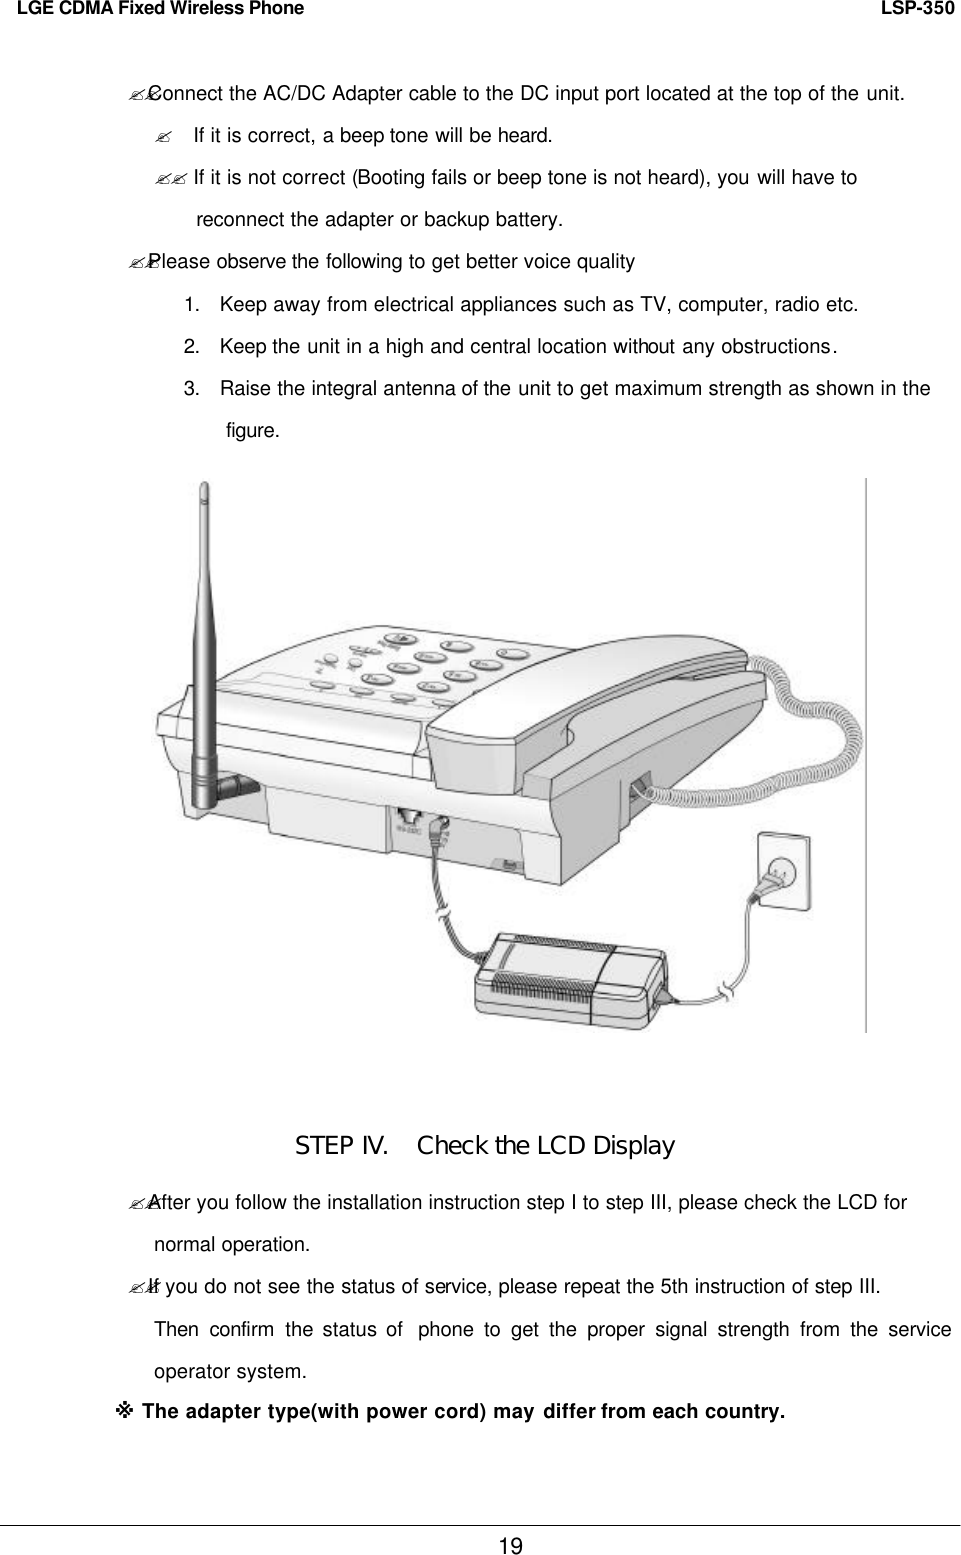   LSP-350 LGE CDMA Fixed Wireless Phone 19 ??Connect the AC/DC Adapter cable to the DC input port located at the top of the unit. ? If it is correct, a beep tone will be heard. ?? If it is not correct (Booting fails or beep tone is not heard), you will have to reconnect the adapter or backup battery. ??Please observe the following to get better voice quality 1. Keep away from electrical appliances such as TV, computer, radio etc. 2. Keep the unit in a high and central location without any obstructions. 3. Raise the integral antenna of the unit to get maximum strength as shown in the   figure.                STEP IV.   Check the LCD Display ??After you follow the installation instruction step I to step III, please check the LCD for   normal operation.  ??If you do not see the status of service, please repeat the 5th instruction of step III. Then confirm  the status of  phone to get the proper signal strength from the service operator system. ※ The adapter type(with power cord) may differ from each country. 